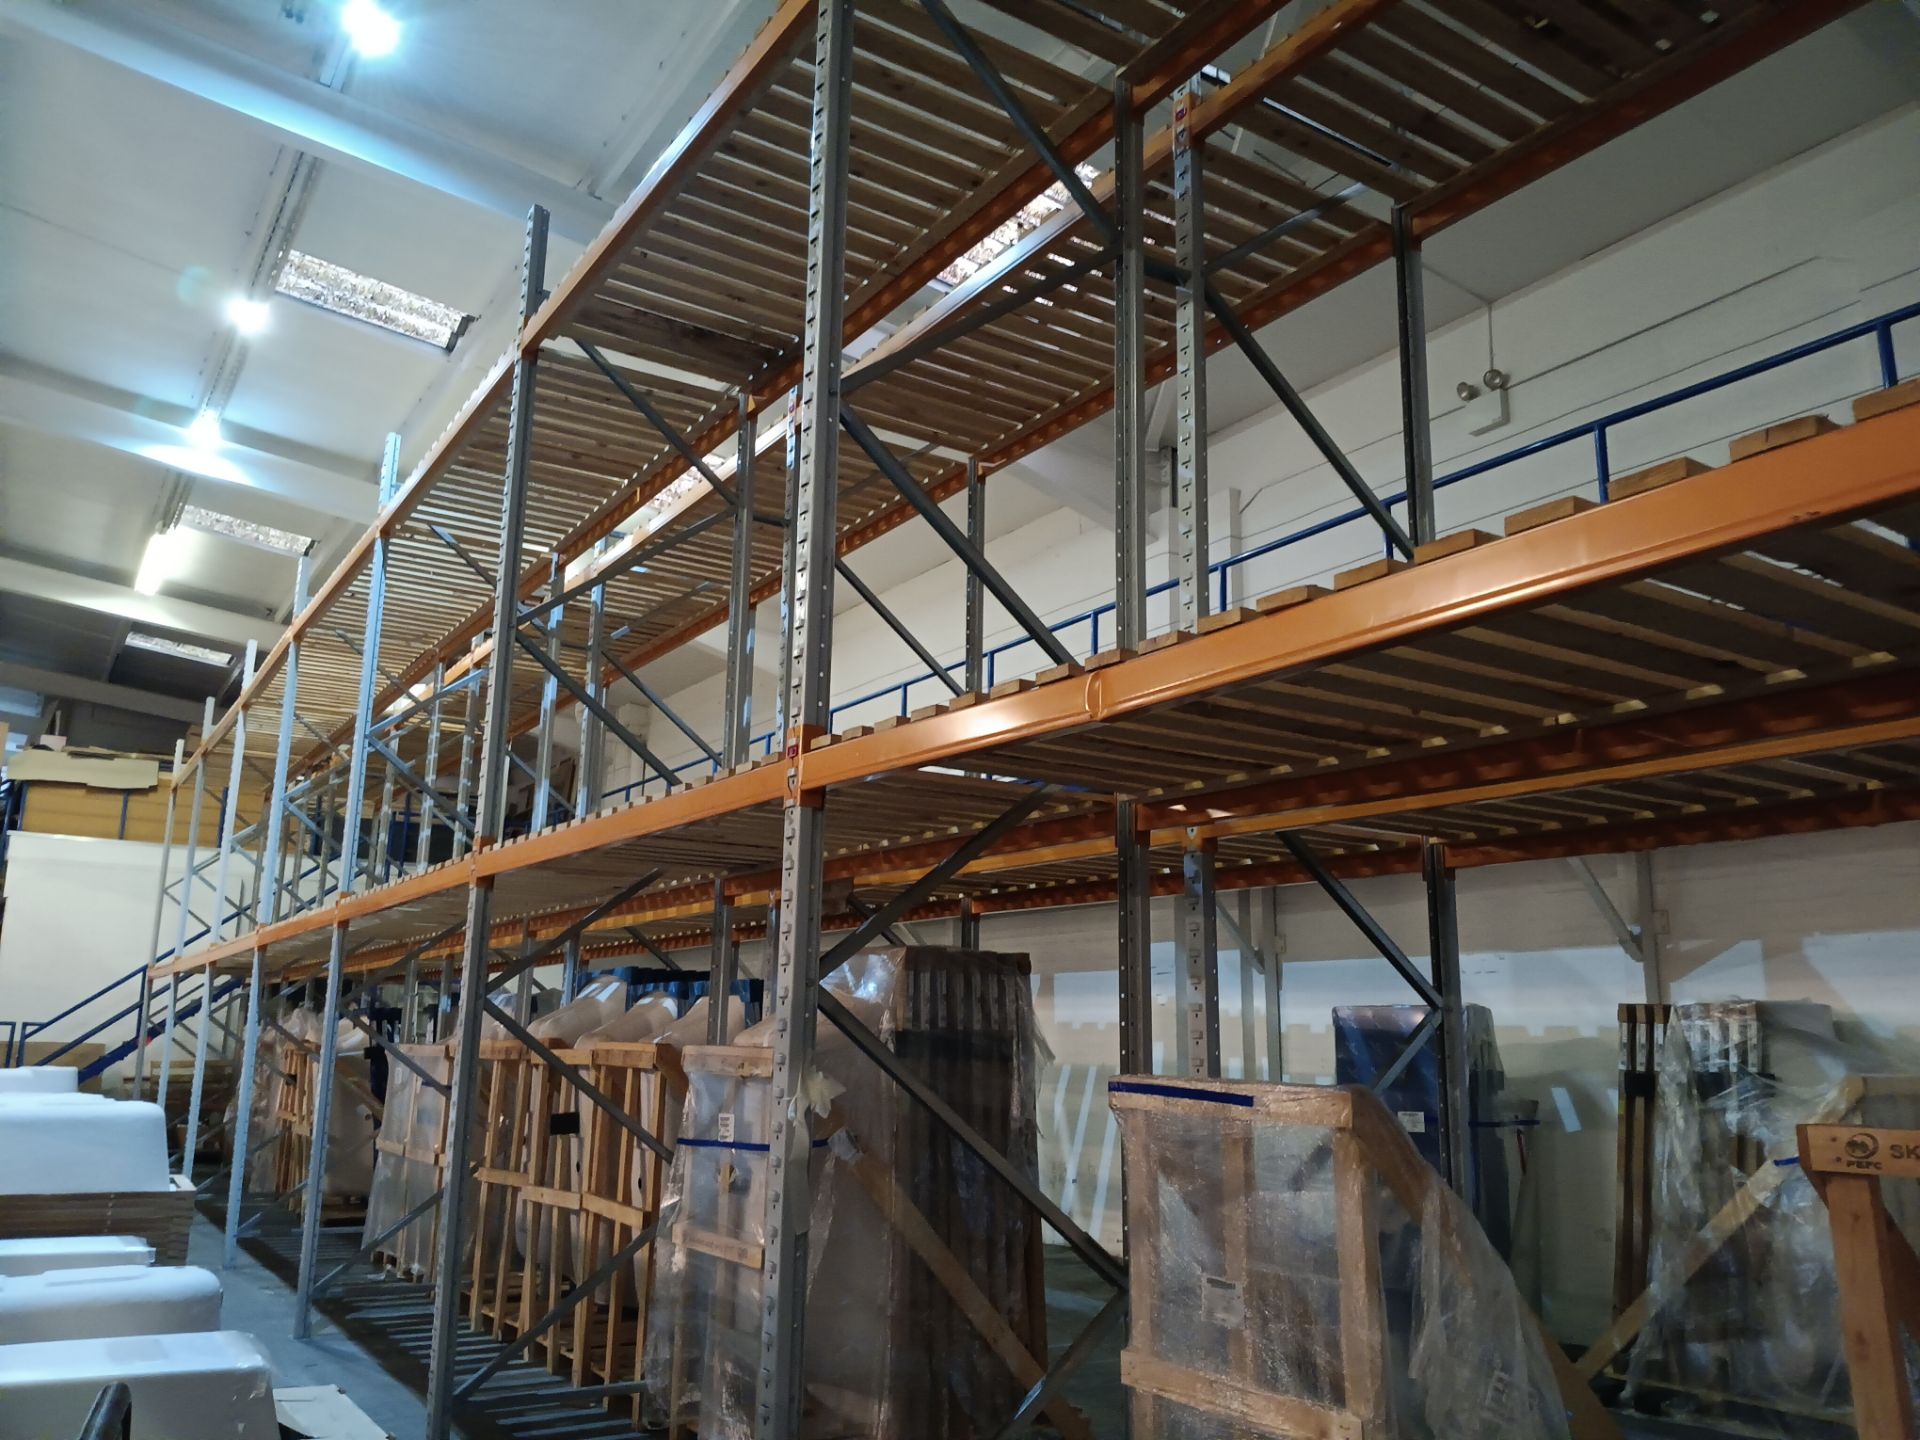 8 bays or orange and blue Bolt-less racking height - Image 2 of 2